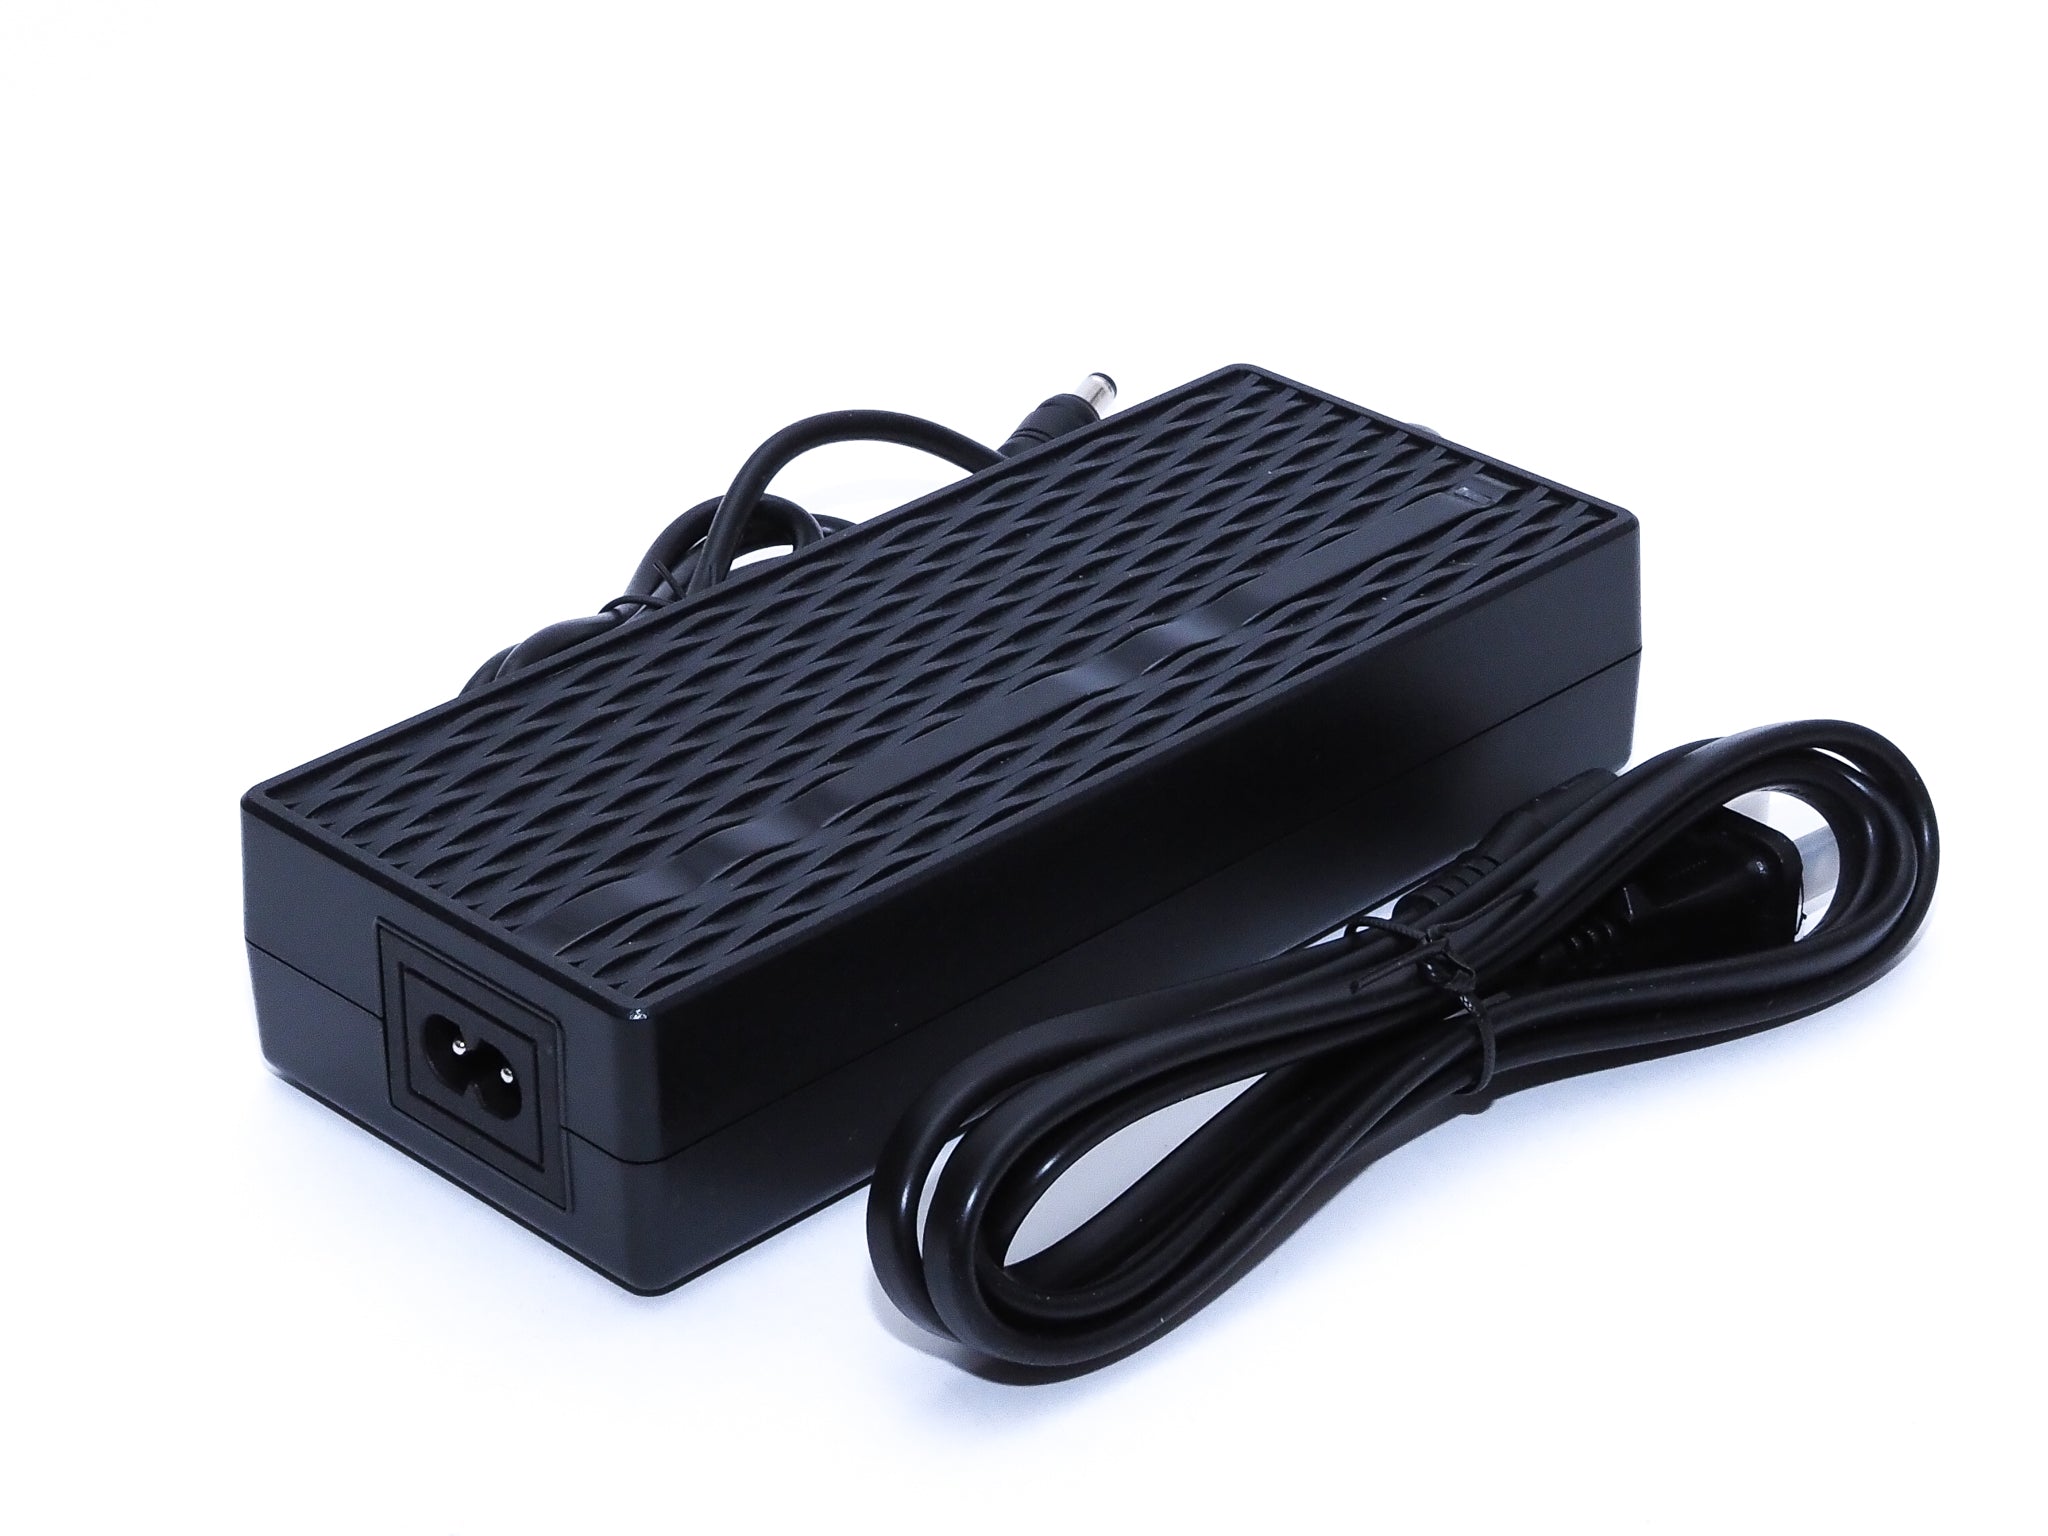 ONSRA Electric Skateboard charger